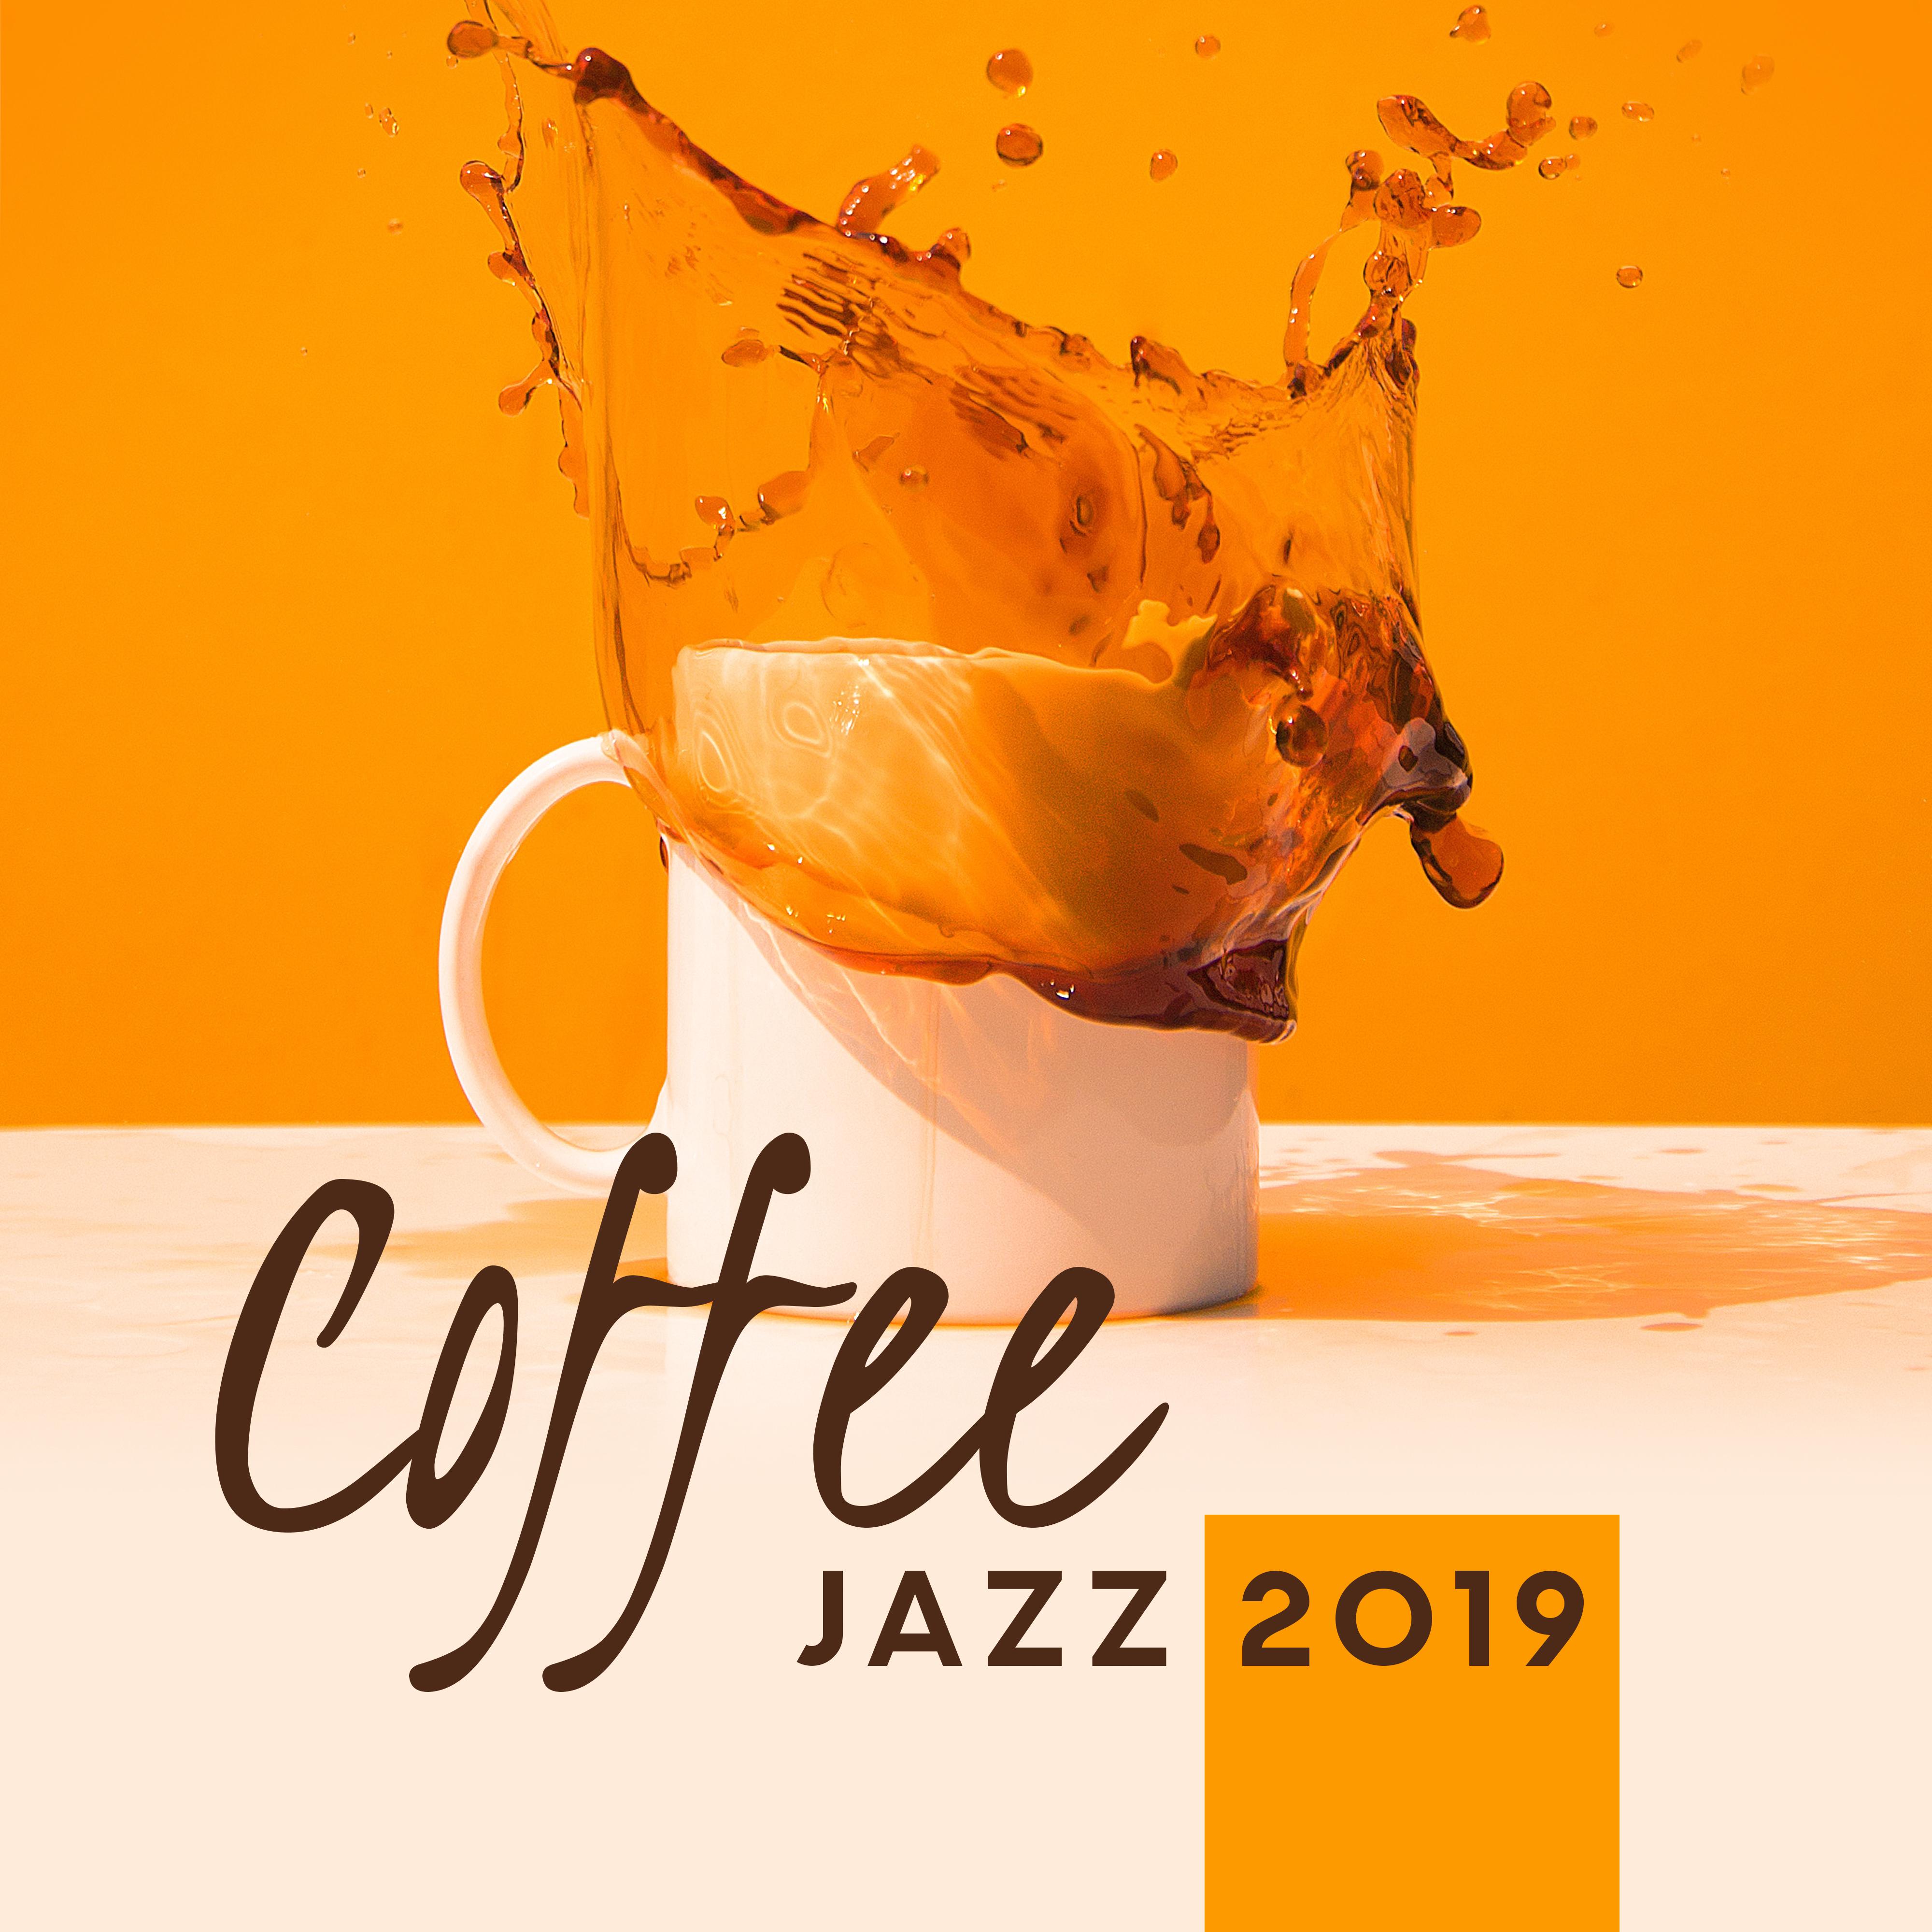 Coffee Jazz 2019 – Best Smooth Jazz Music Selection for Spending Time in Cafe, Relaxing Sounds of Piano, Sax, Trumpet & Others